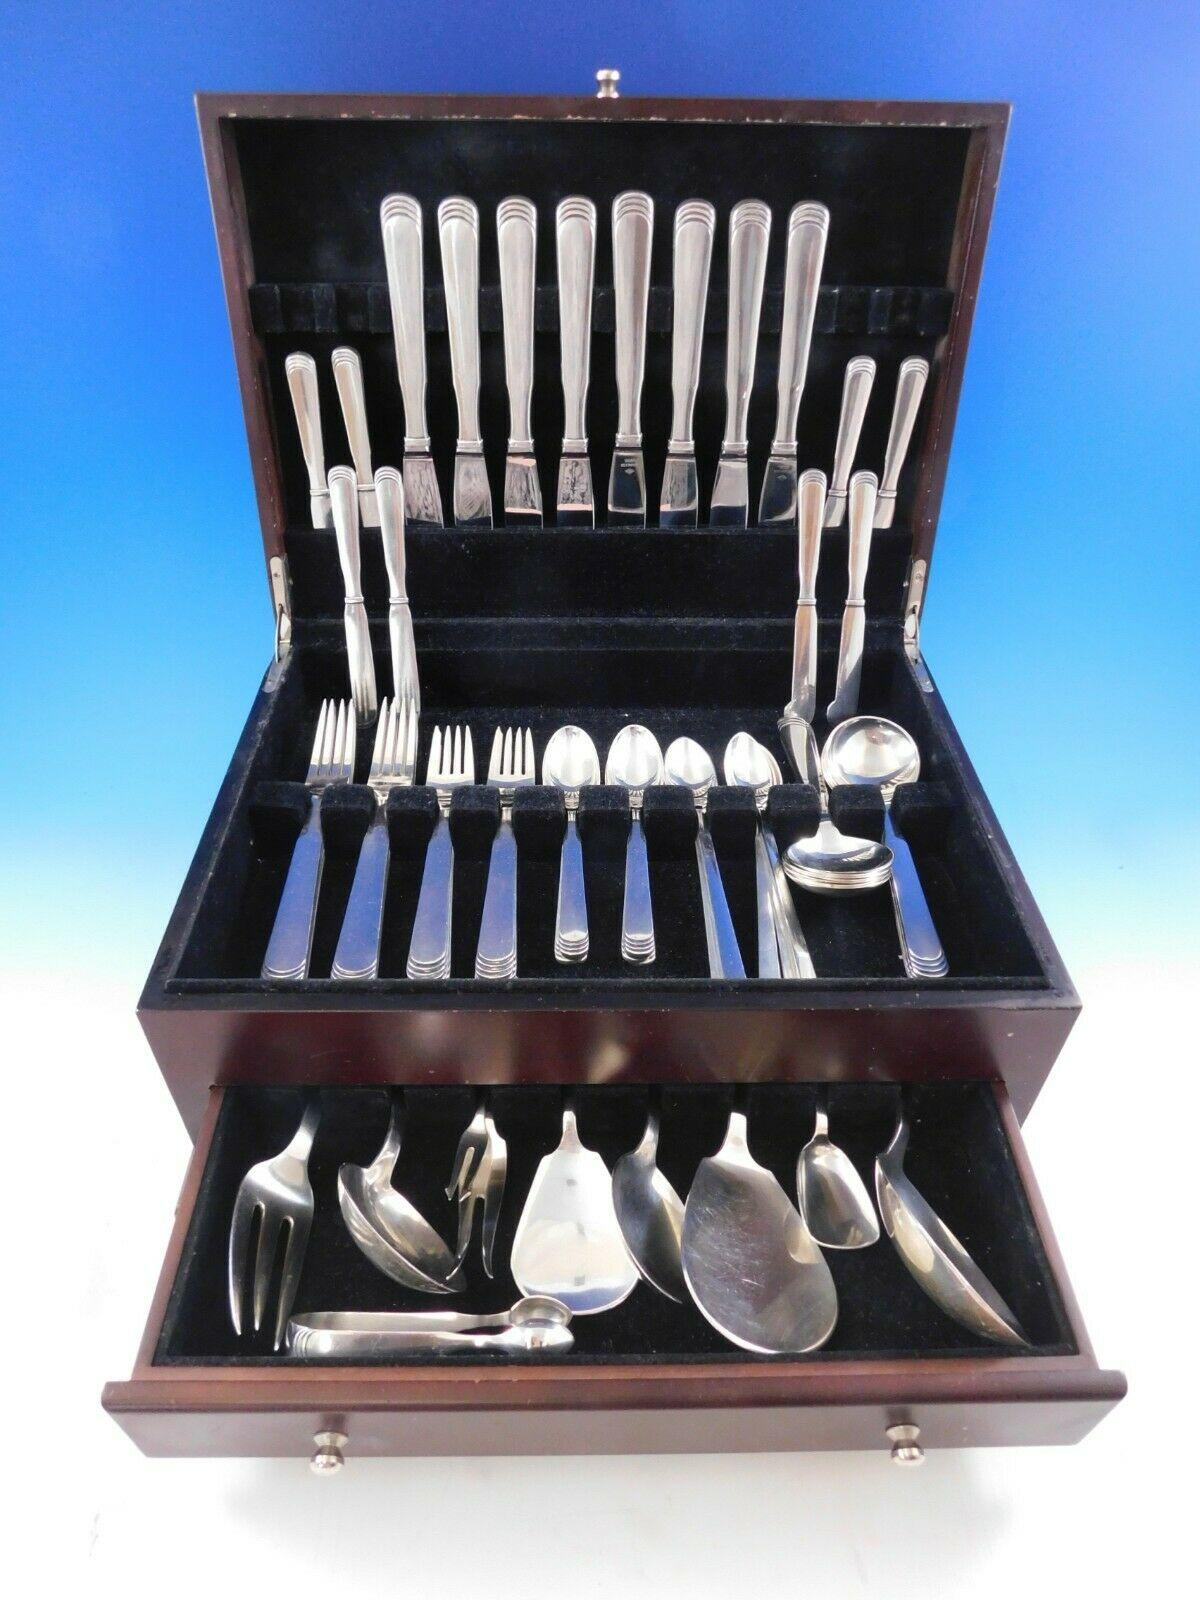 Dinner size ripple by Hans Hansen Danish sterling silver flatware set, 87 pieces. This set includes:

8 dinner knives, long handle, 8 7/8